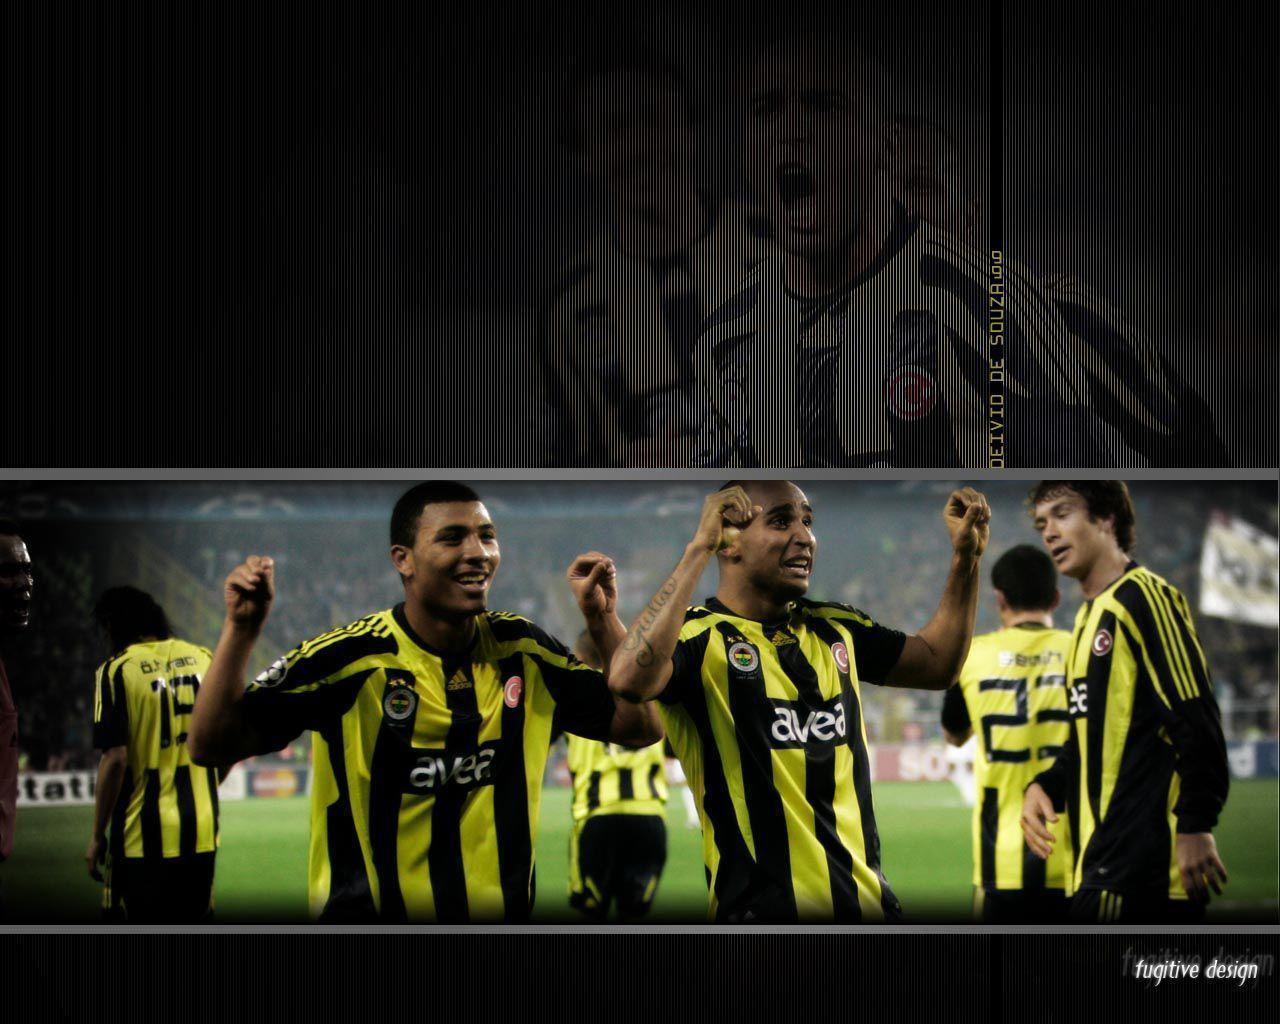 Fenerbahçe SK image 23512erfw HD wallpaper and background photo